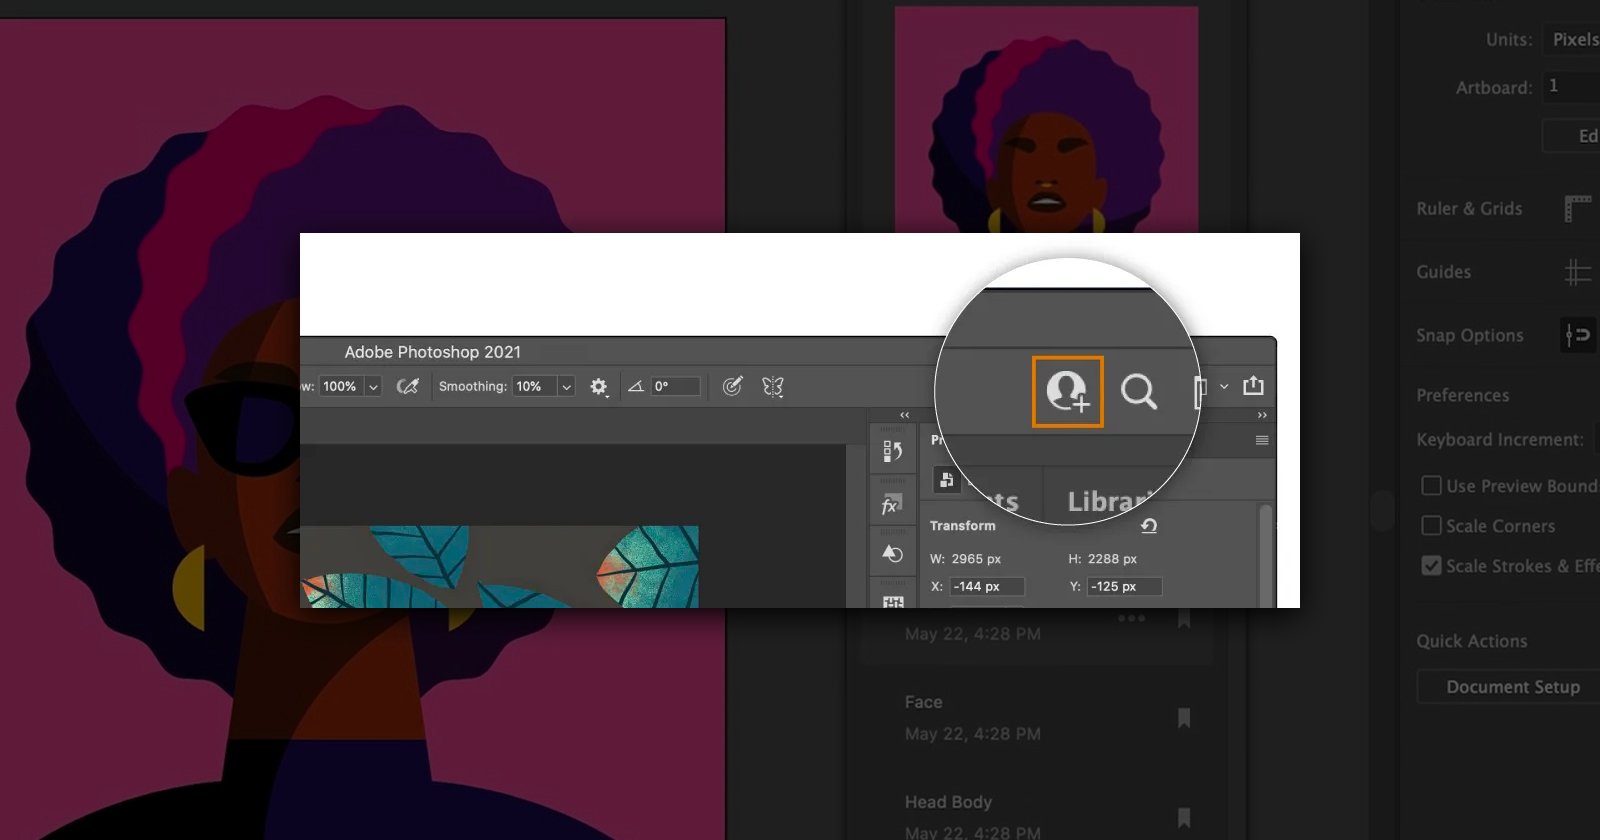 Adobe adds easy collaboration and asynchronous editing to Photoshop